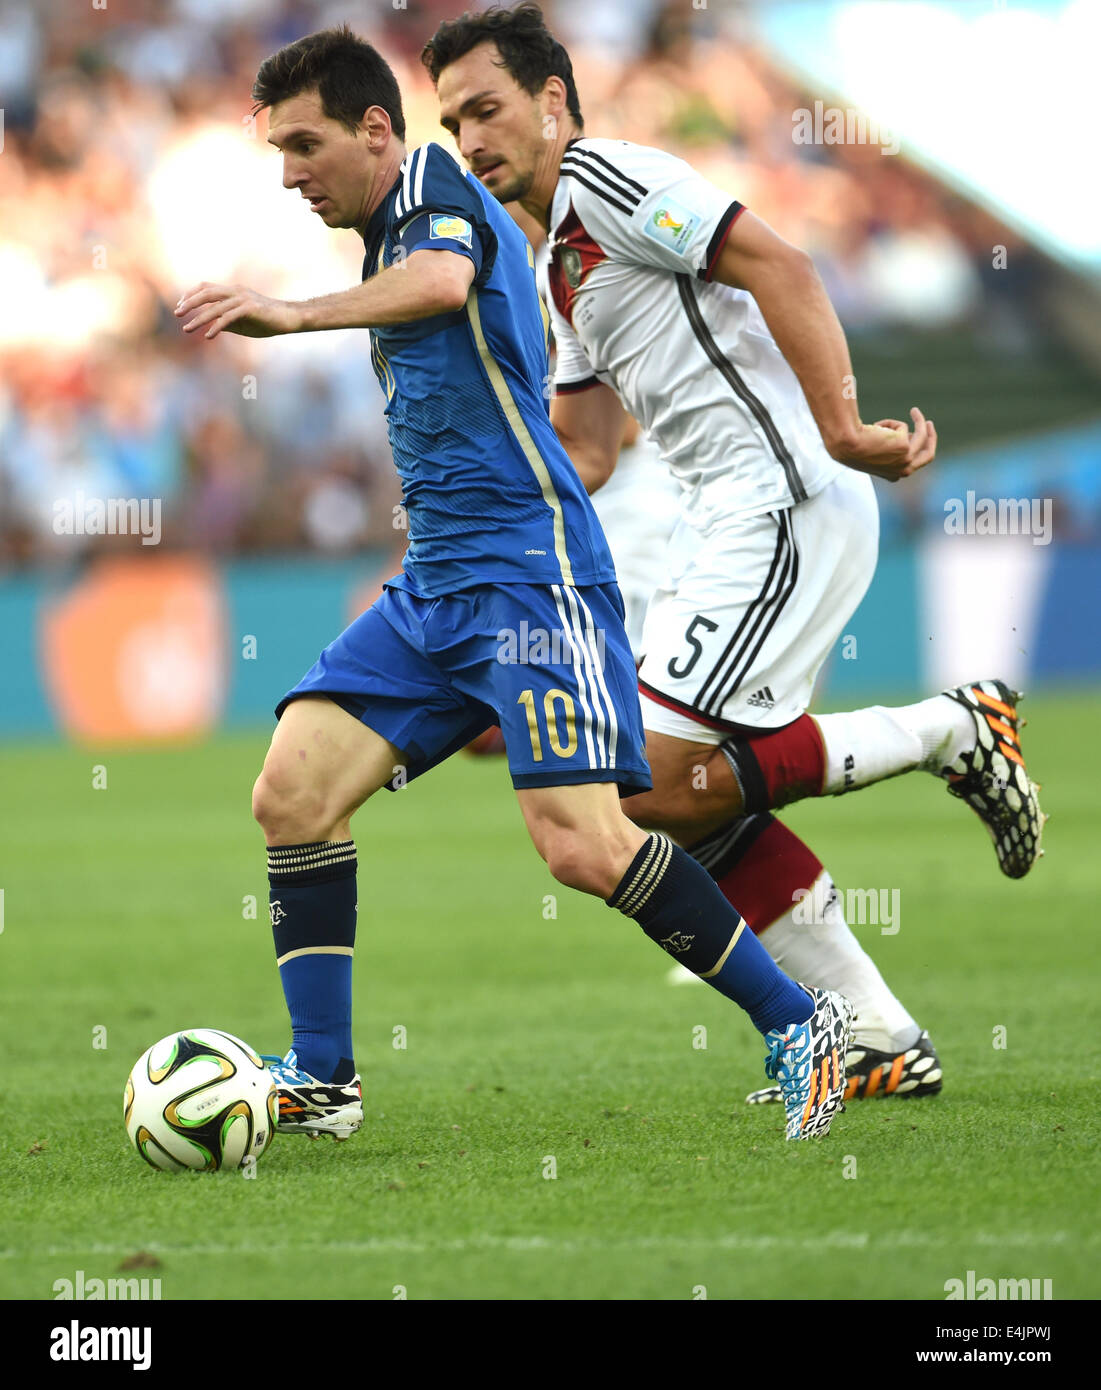 Rio de Janeiro, Brazil. 13th July, 2014. Mats Hummels (R) of Germany and Lionel Messi of Argentina vie for the ball during the FIFA World Cup 2014 final soccer match between Germany and Argentina at the Estadio do Maracana in Rio de Janeiro, Brazil, 13 July 2014. Photo: Andreas Gebert/dpa/Alamy Live News Stock Photo